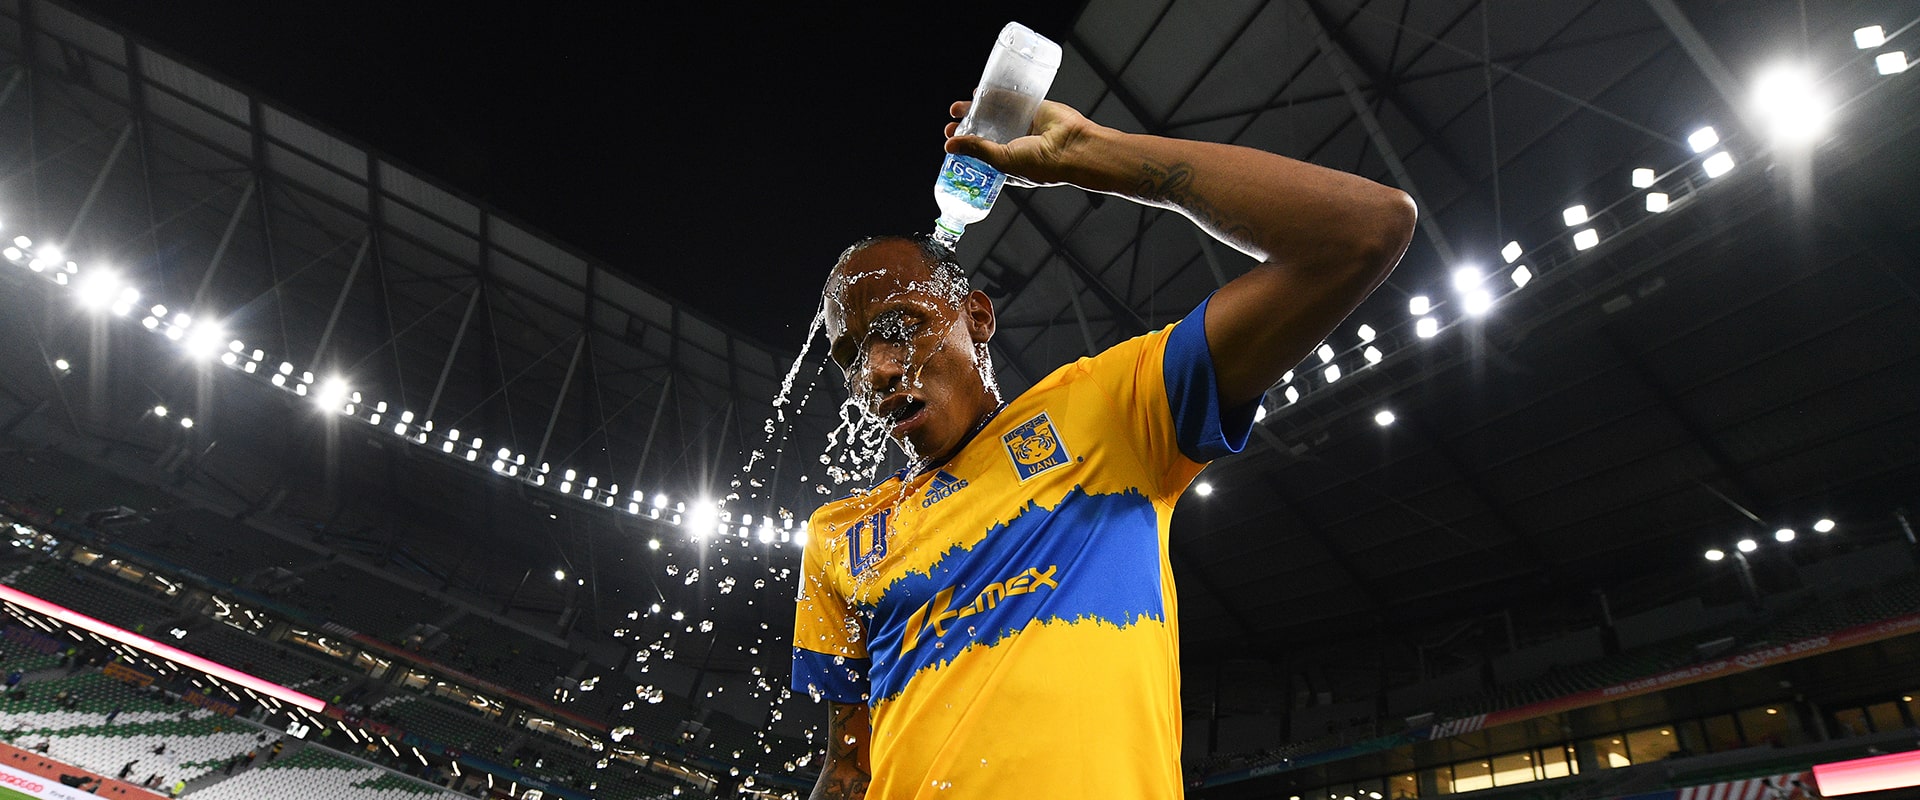 Luis Quinones of Tigress UANL pour water on im sef during di Fifa Club World Cup semi-final for di Qatar Education City Stadium for February 2021 for Doha